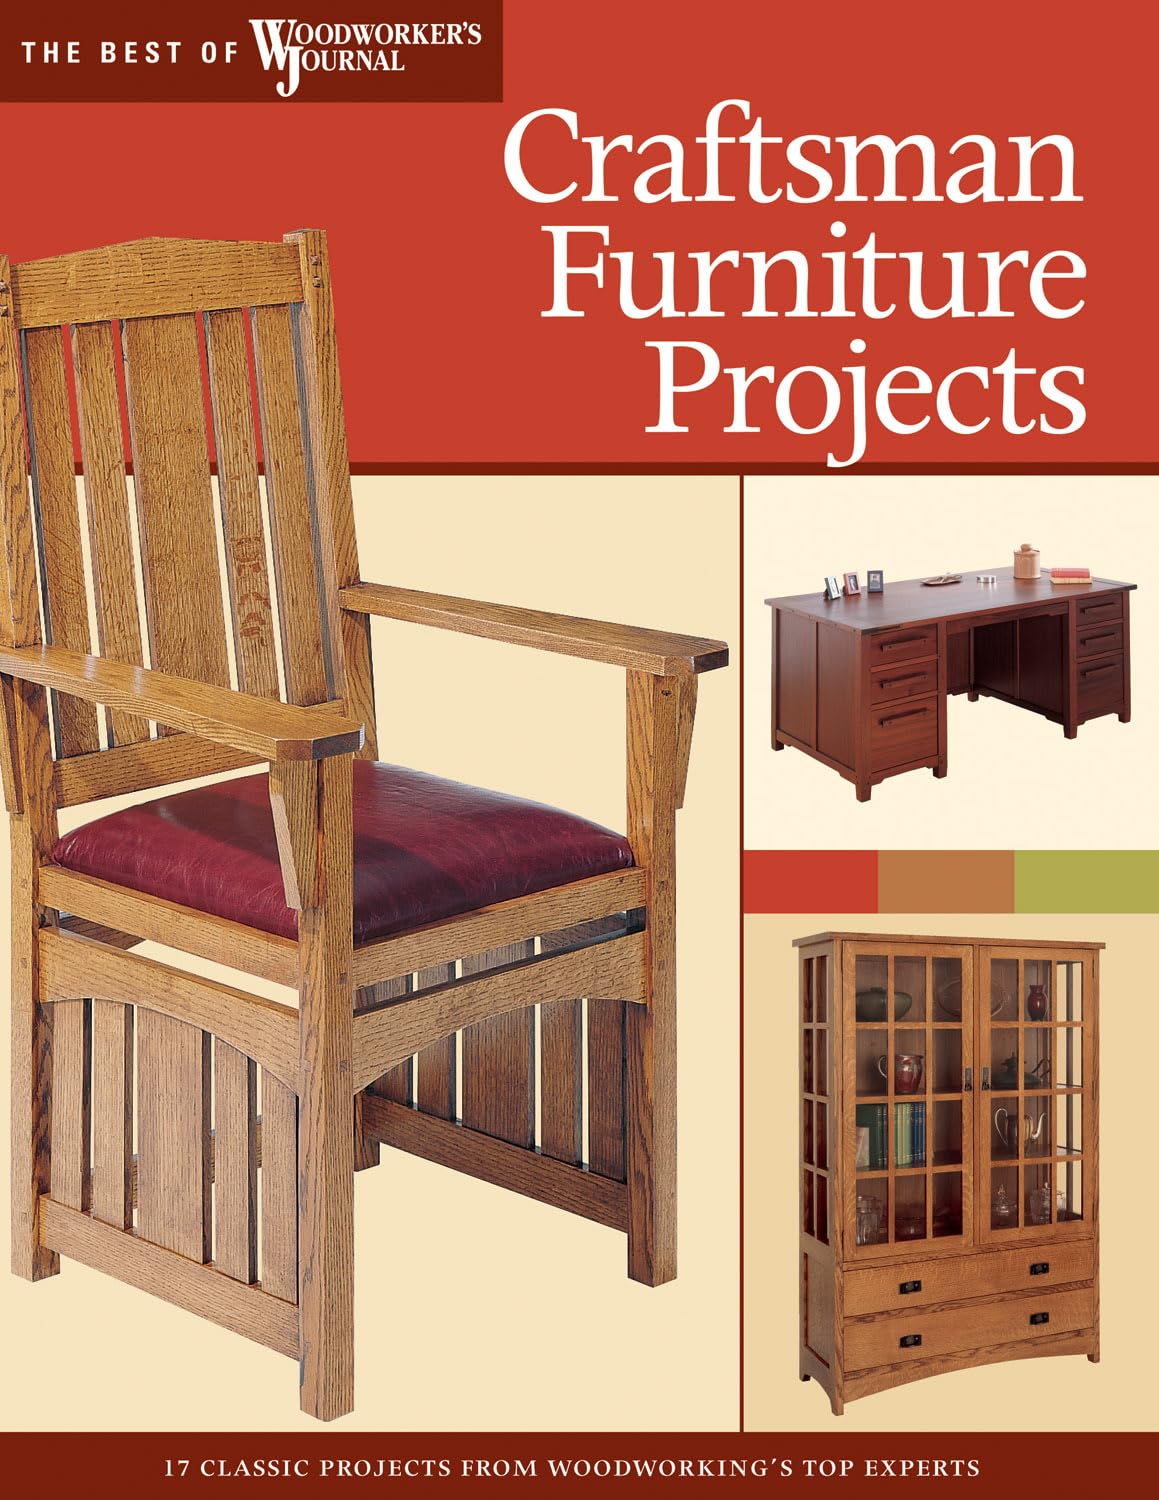 Craftsman Furniture Projects: Timeless Designs and Trusted Techniques from Woodworking's Top Experts (Fox Chapel Publishing) (Best of Woodworker's